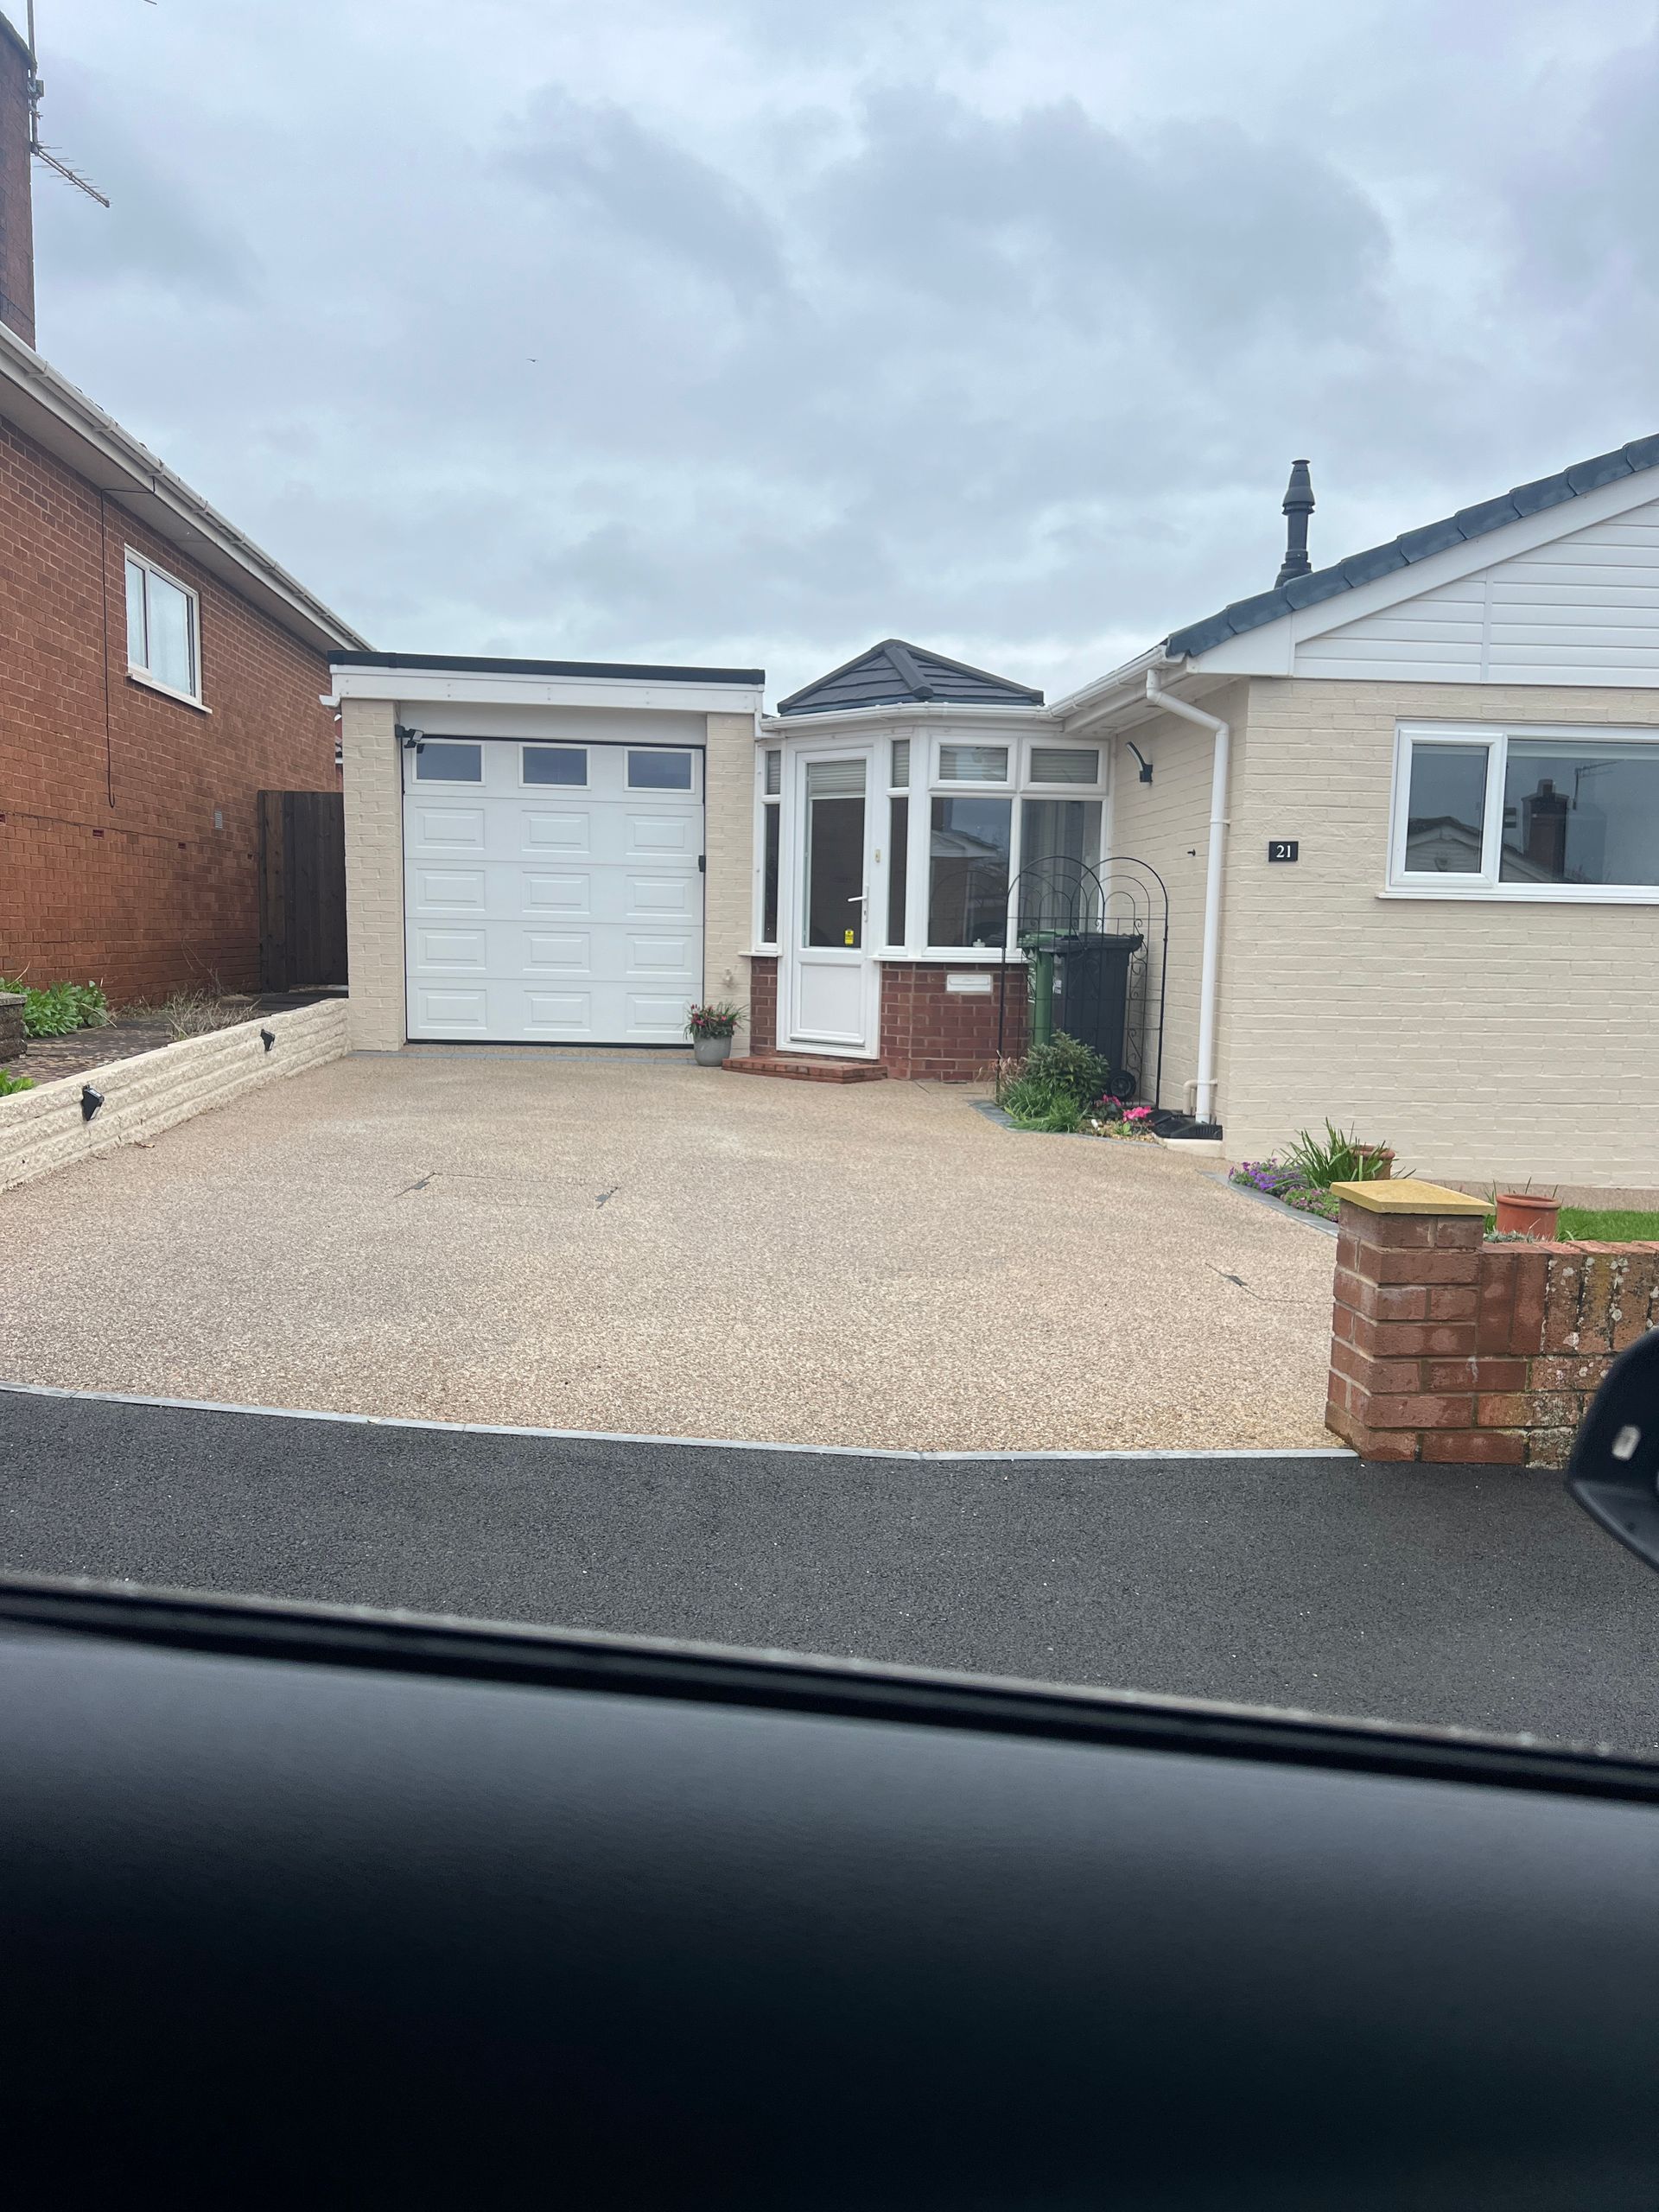 Light beige resin driveway leading up to a white garage and cream bungalow.